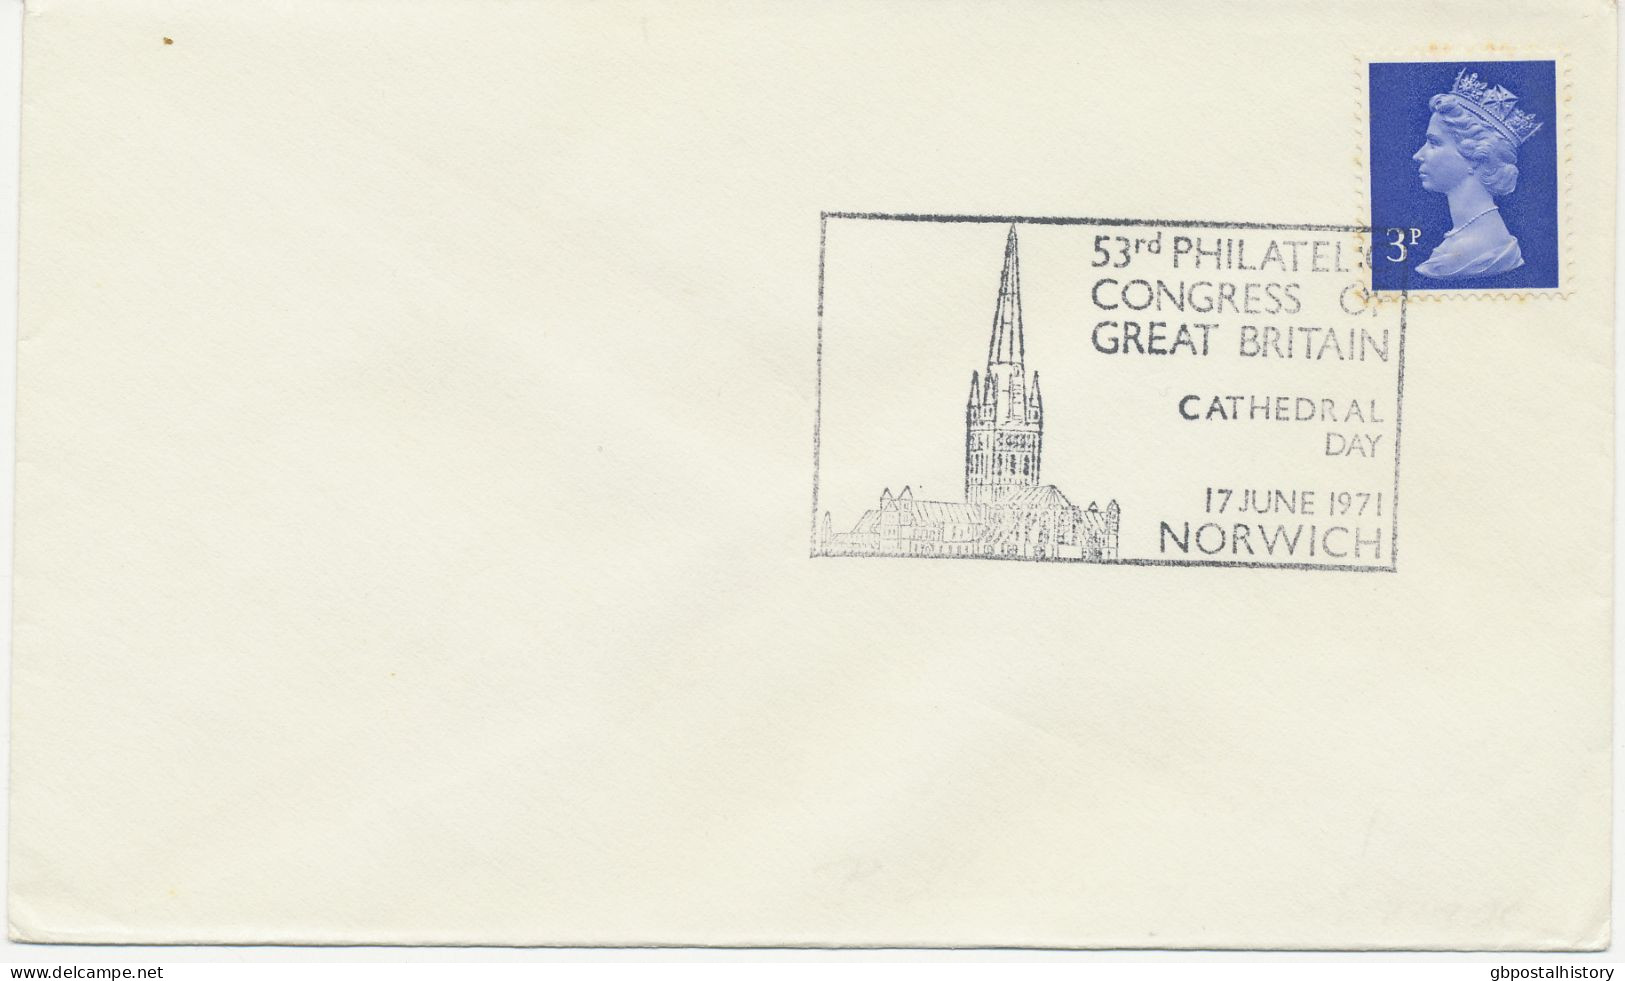 GB SPECIAL EVENT POSTMARKS 1971 53RD PHILATELIC CONGRESS OF GREAT BRITAIN NORWICH - CATHEDRAL DAY - Cartas & Documentos